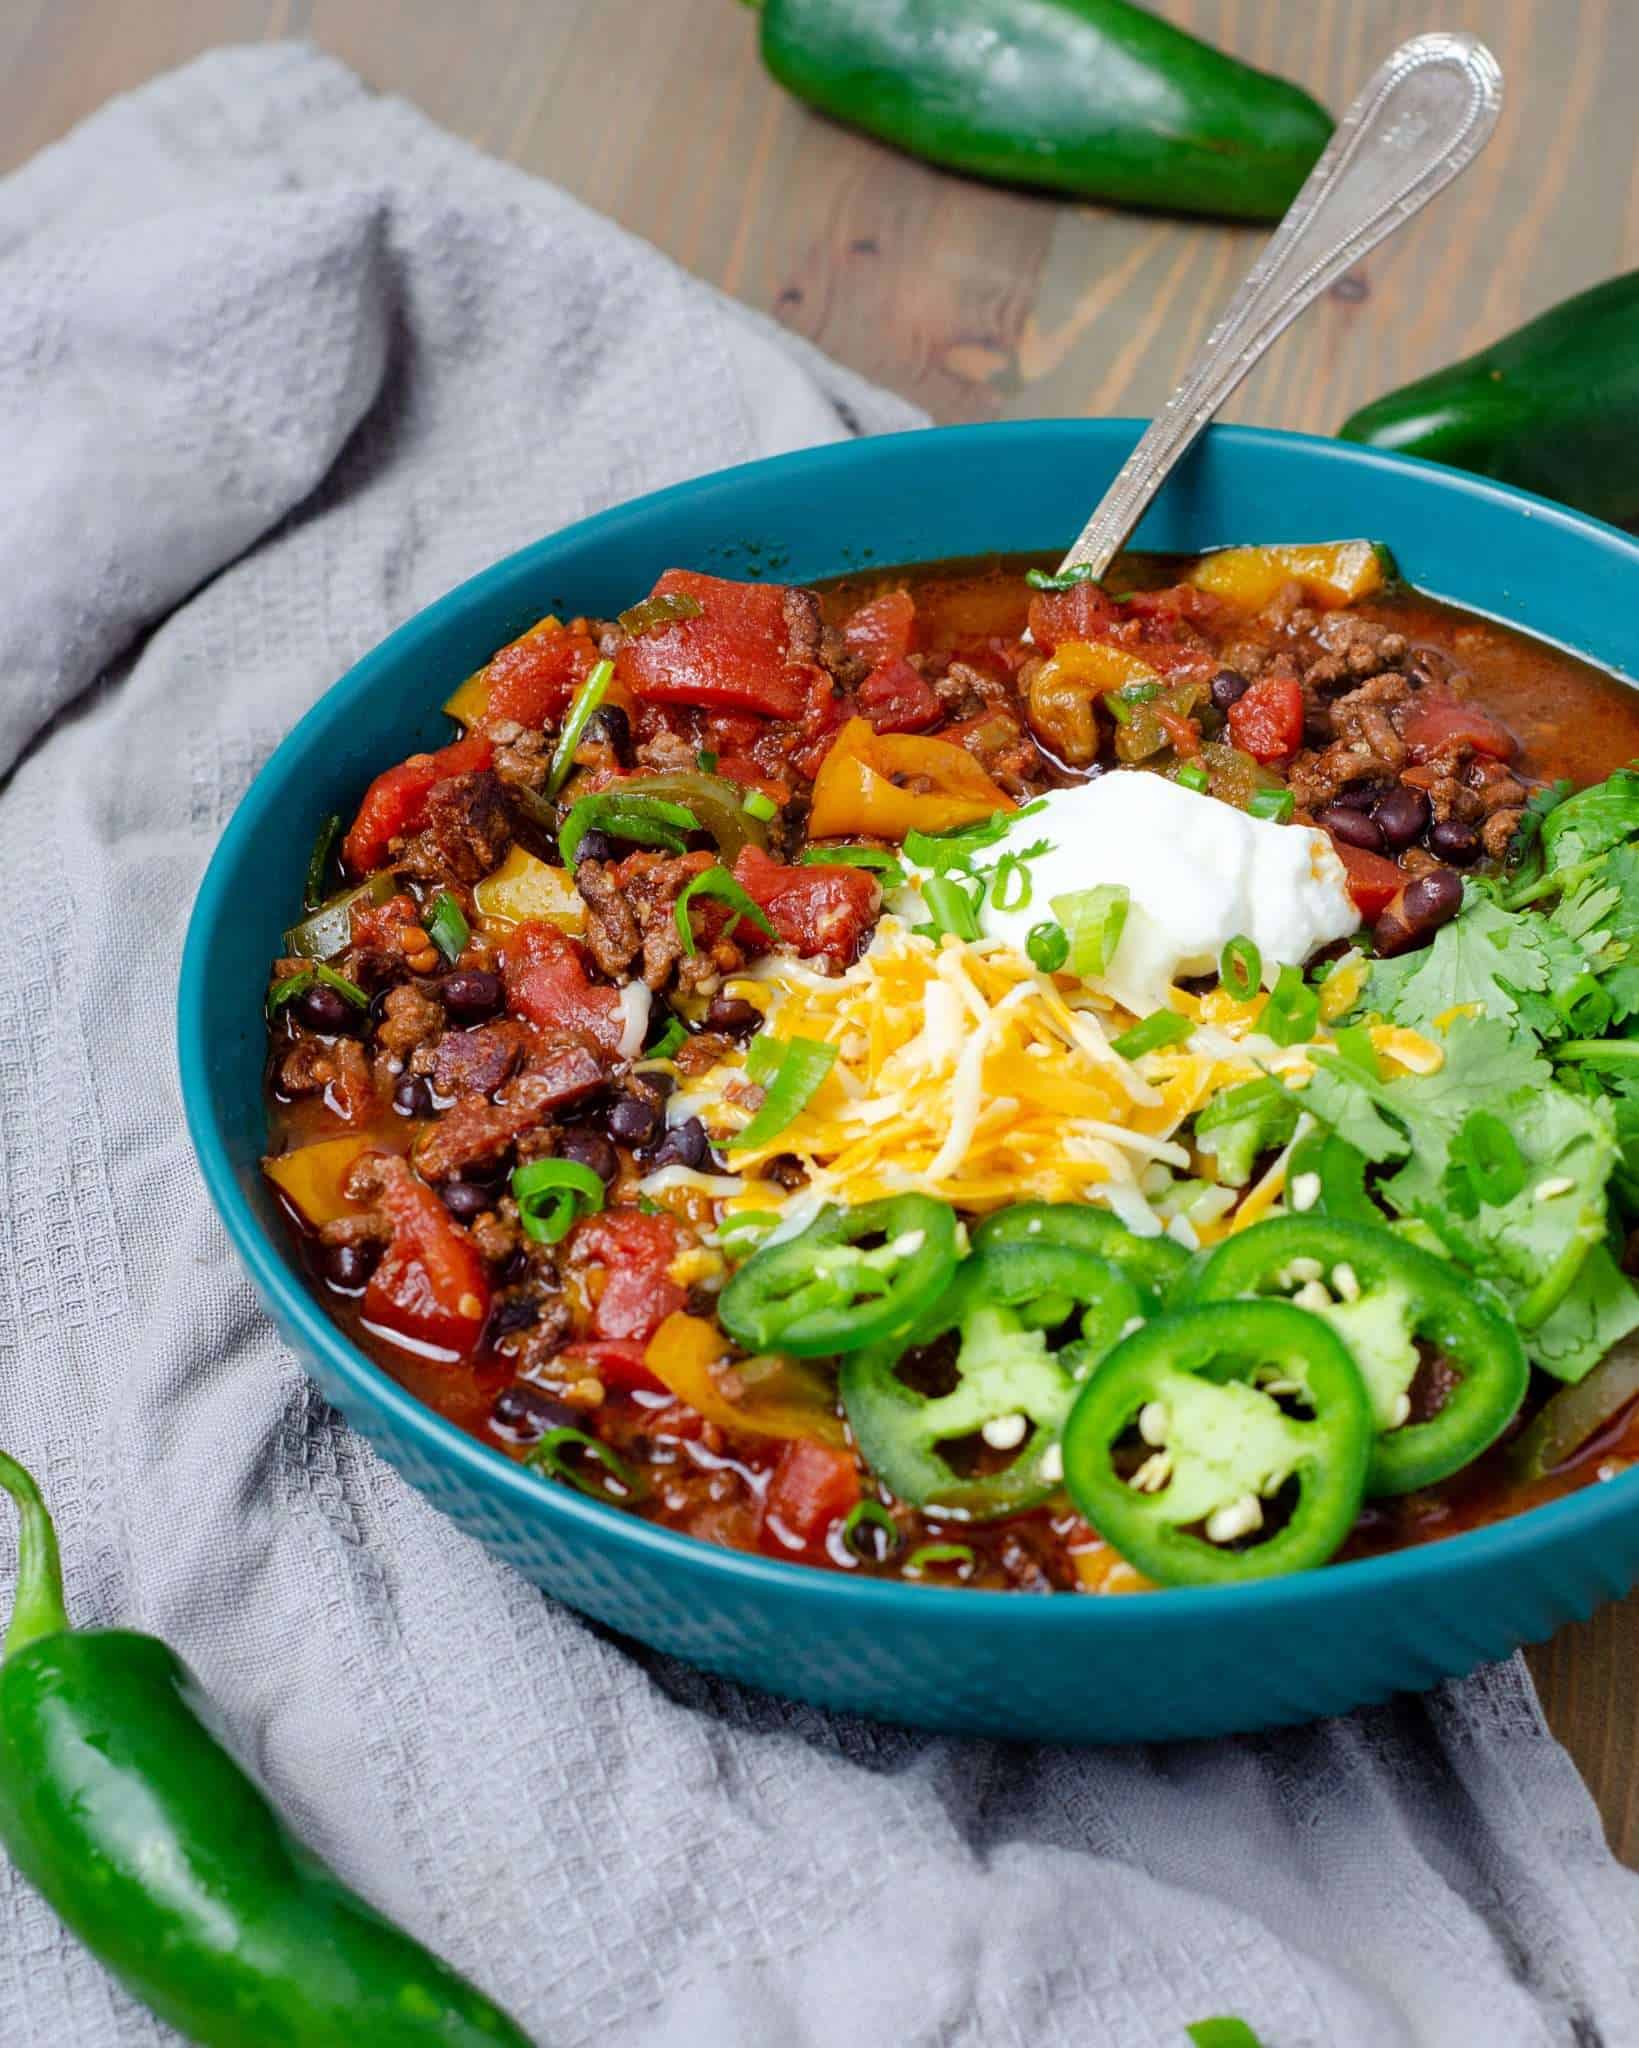 Low Carb Homestyle Chili With Beans | The BEST Keto Chili